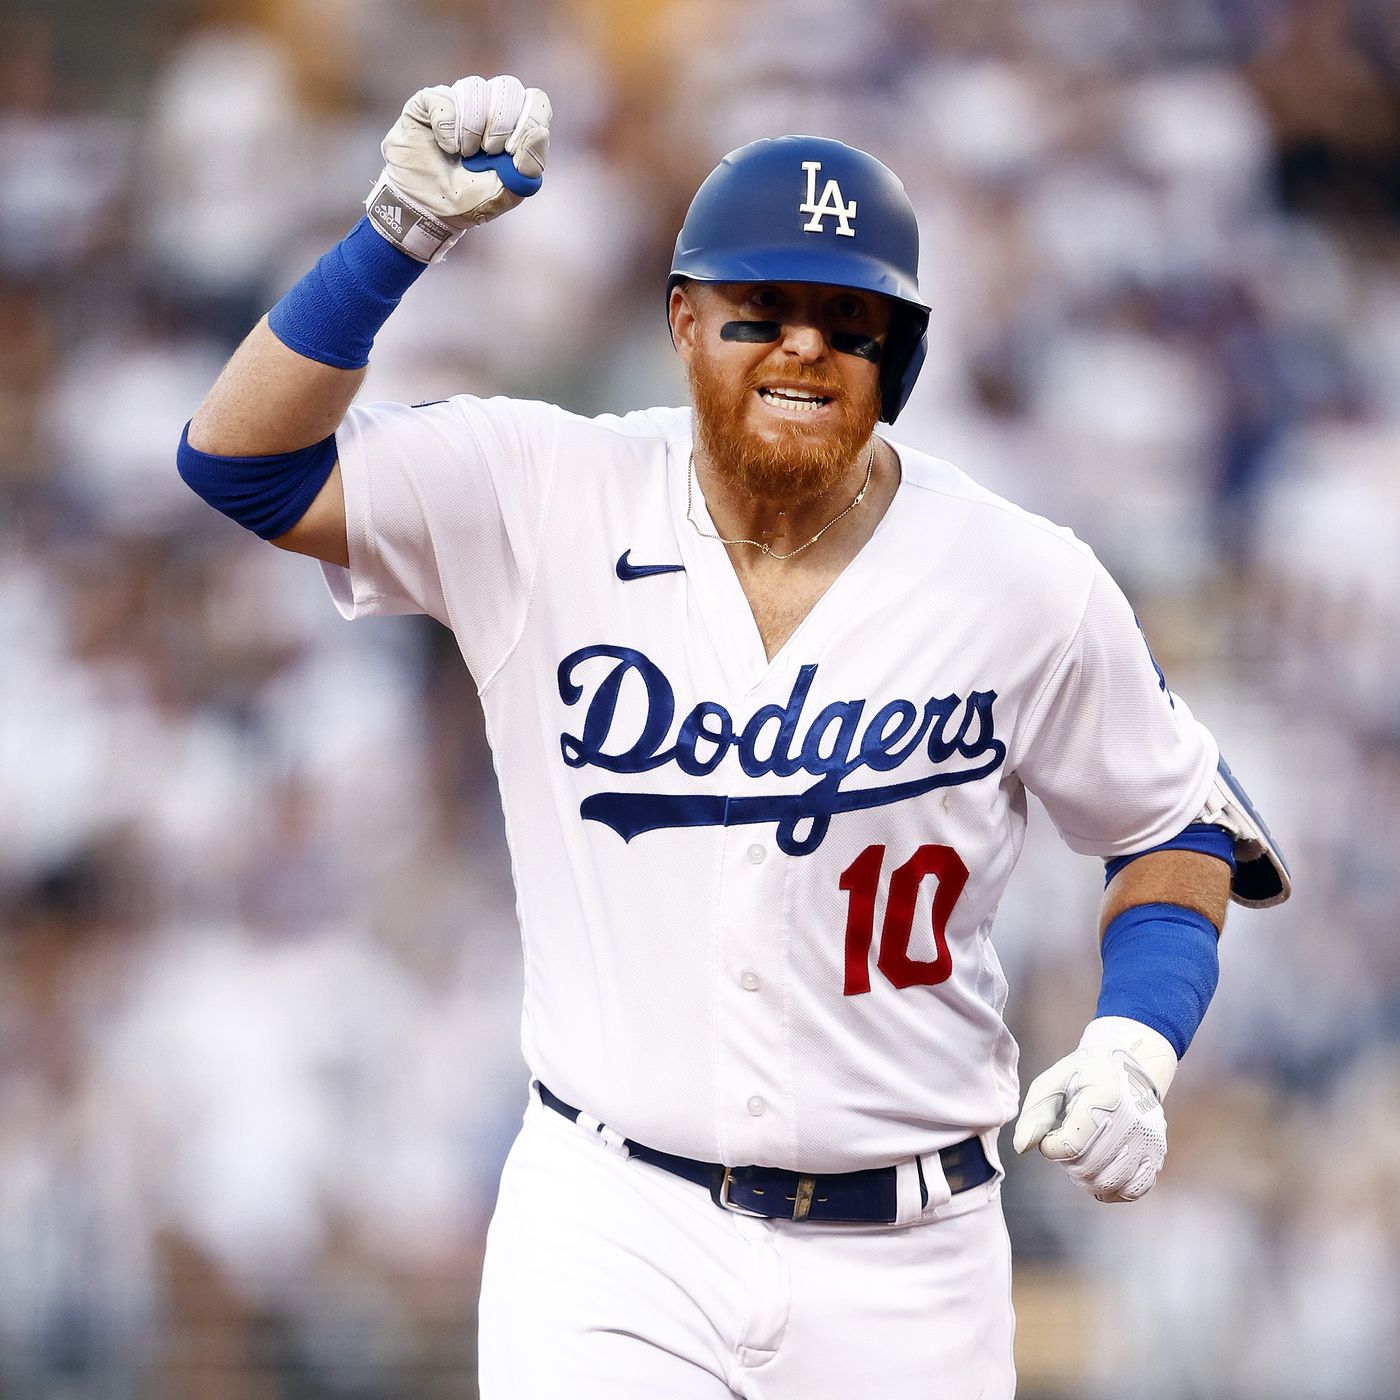 Justin Turner makes Cactus League debut today